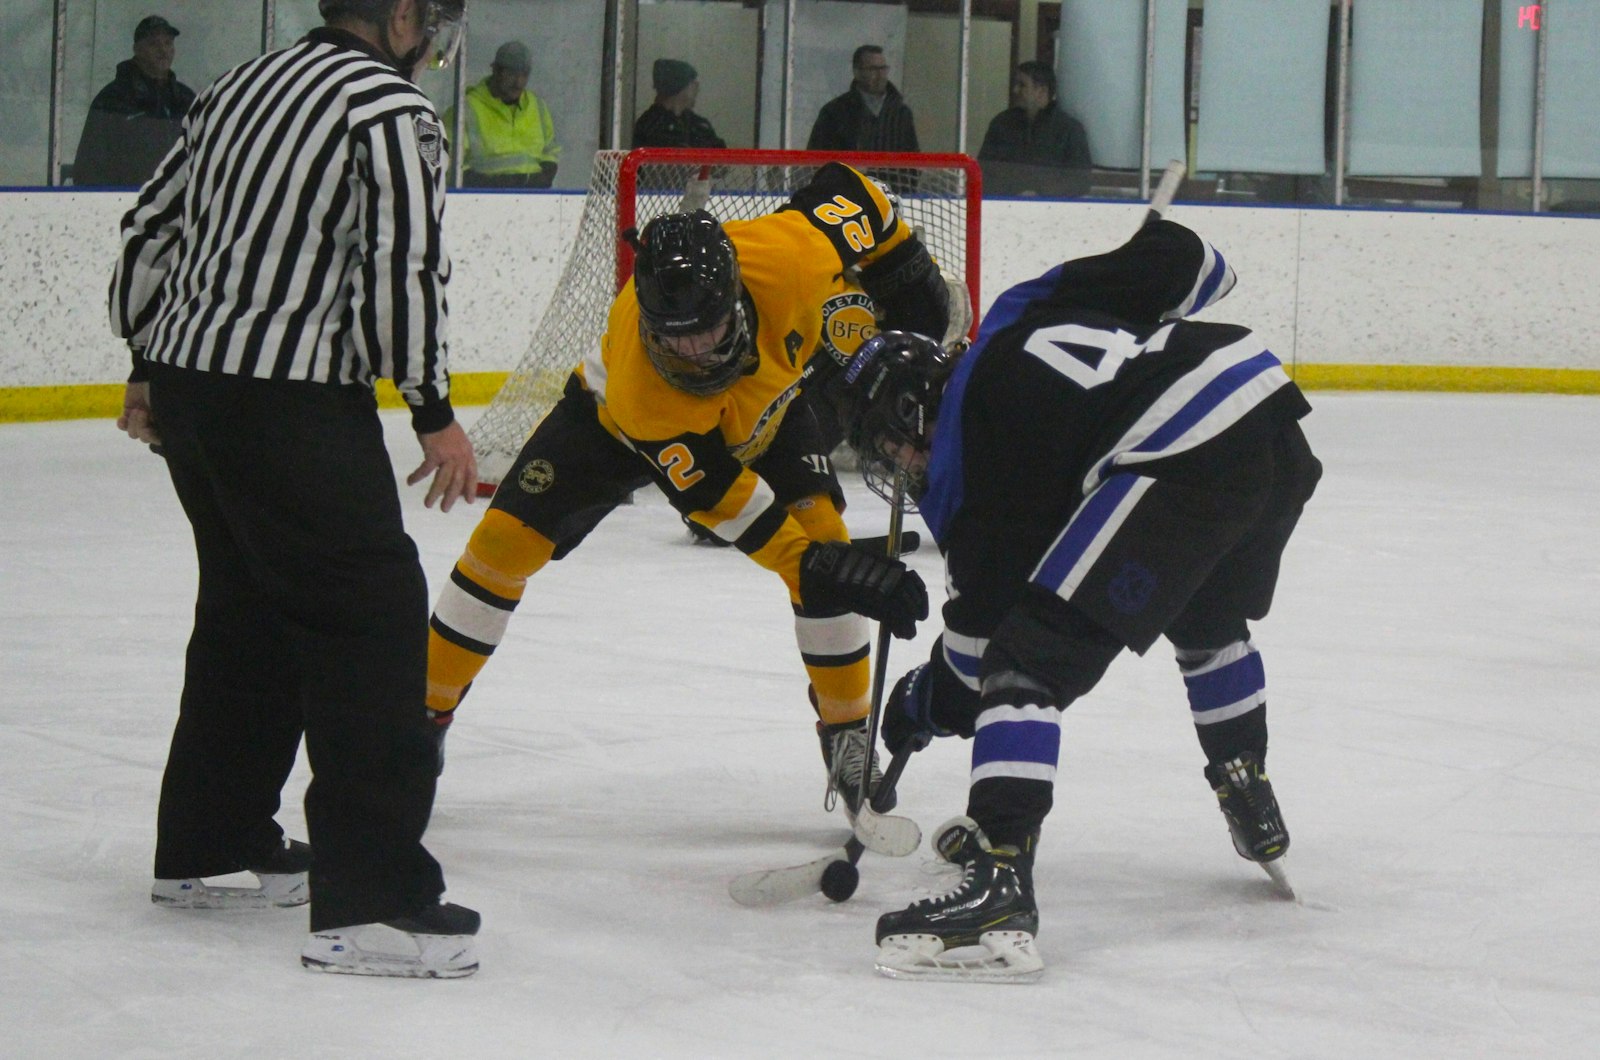 Bishop Foley United’s co-operative agreement even extends to the public schools. Blake Holtkamp, a senior from Madison Heights Lamphere, goes after the puck on a faceoff.